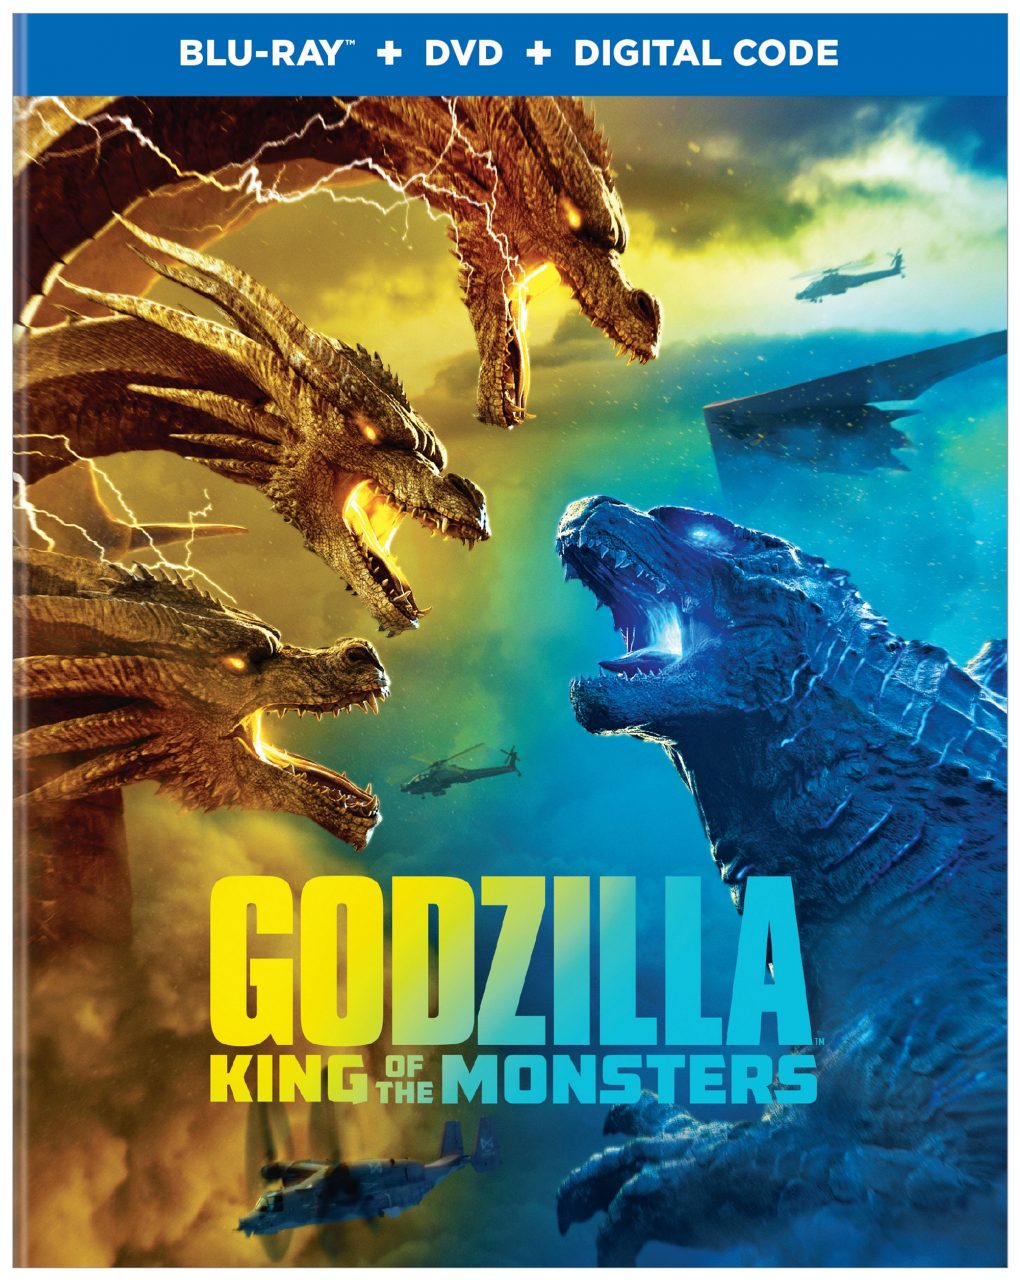 Godzilla: King Of The Monsters Blu-Ray Combo pack (Warner Bros. Home Entertainment)